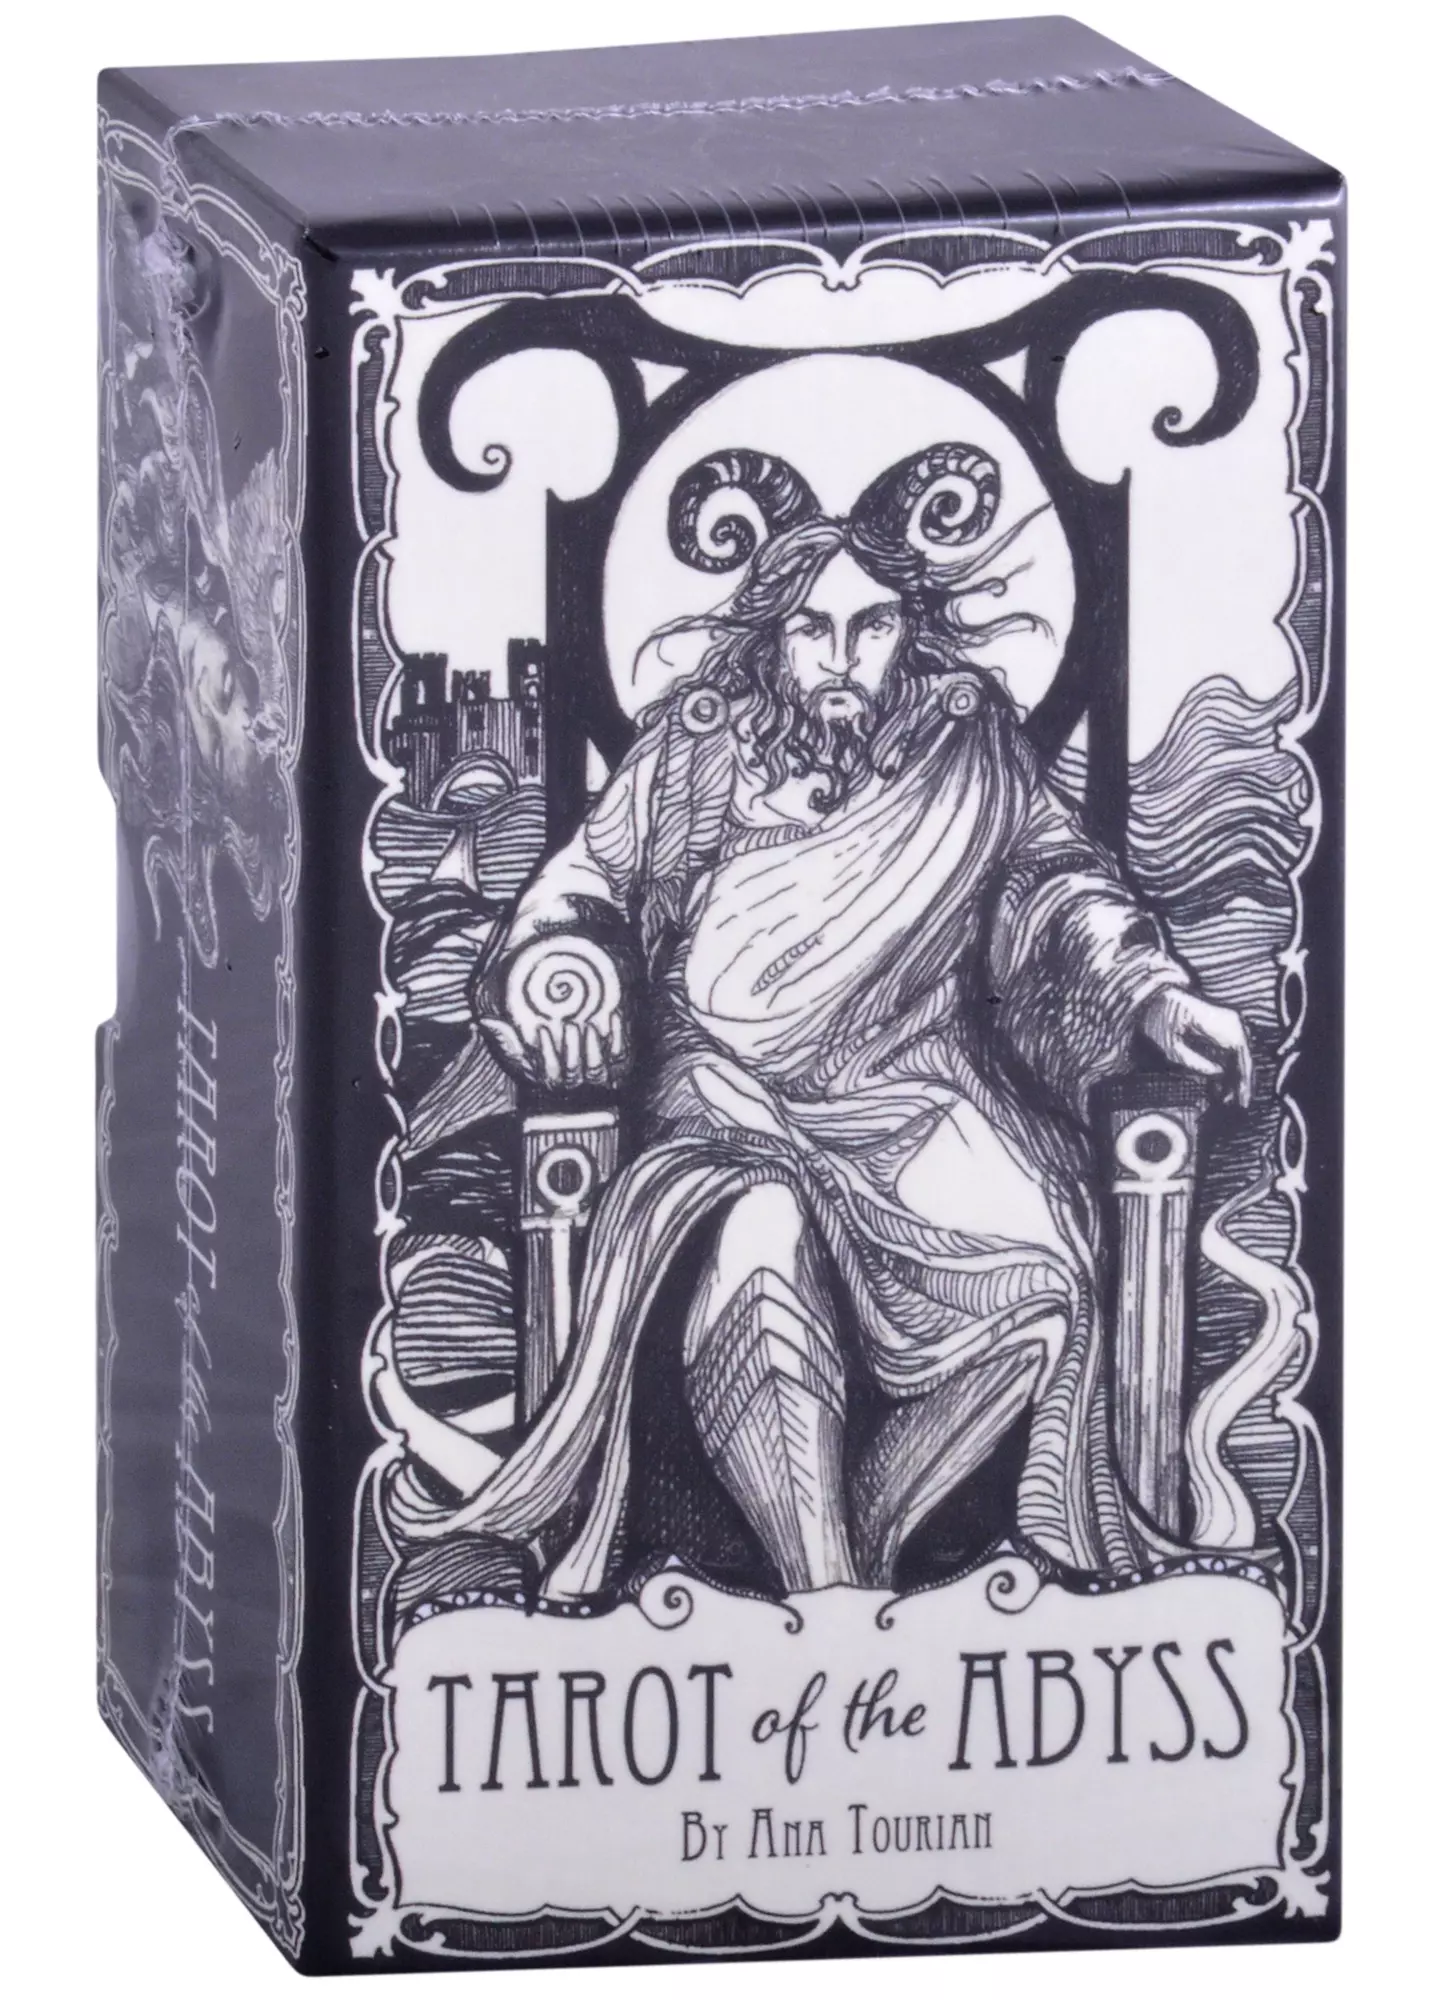  - Tarot of the Abyss